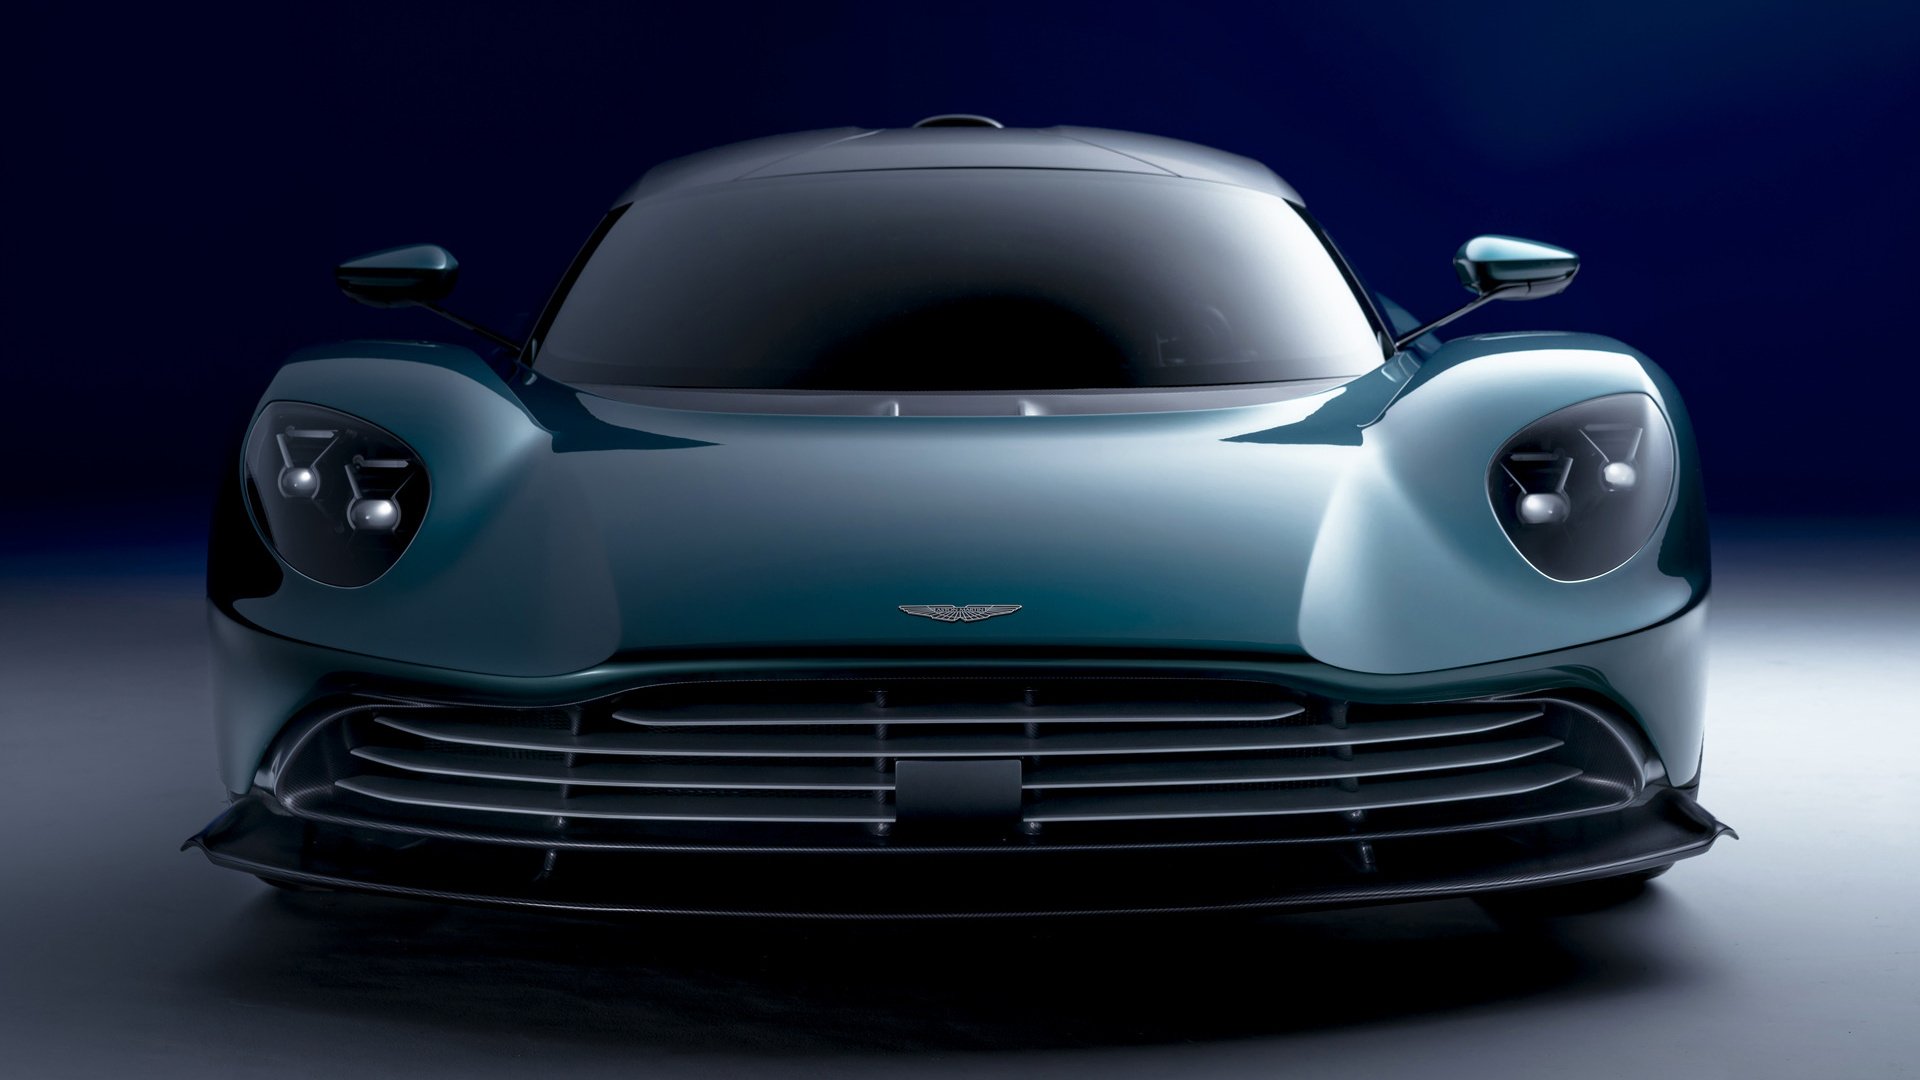 Aston Martin Has Unveiled Its Second-Fastest Convertible Car